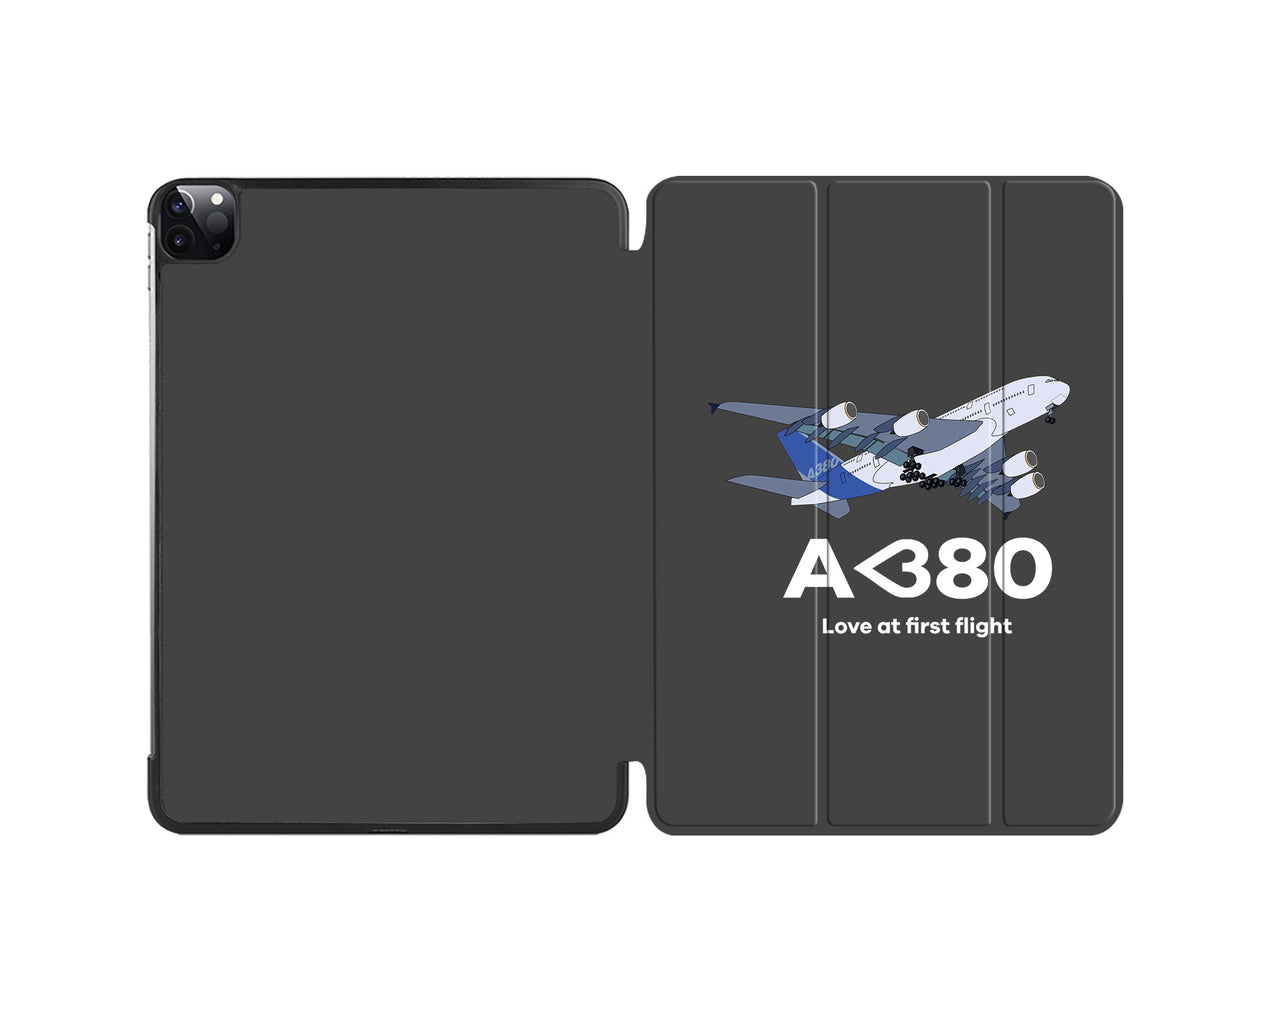 Airbus A380 Love at first flight Designed iPad Cases